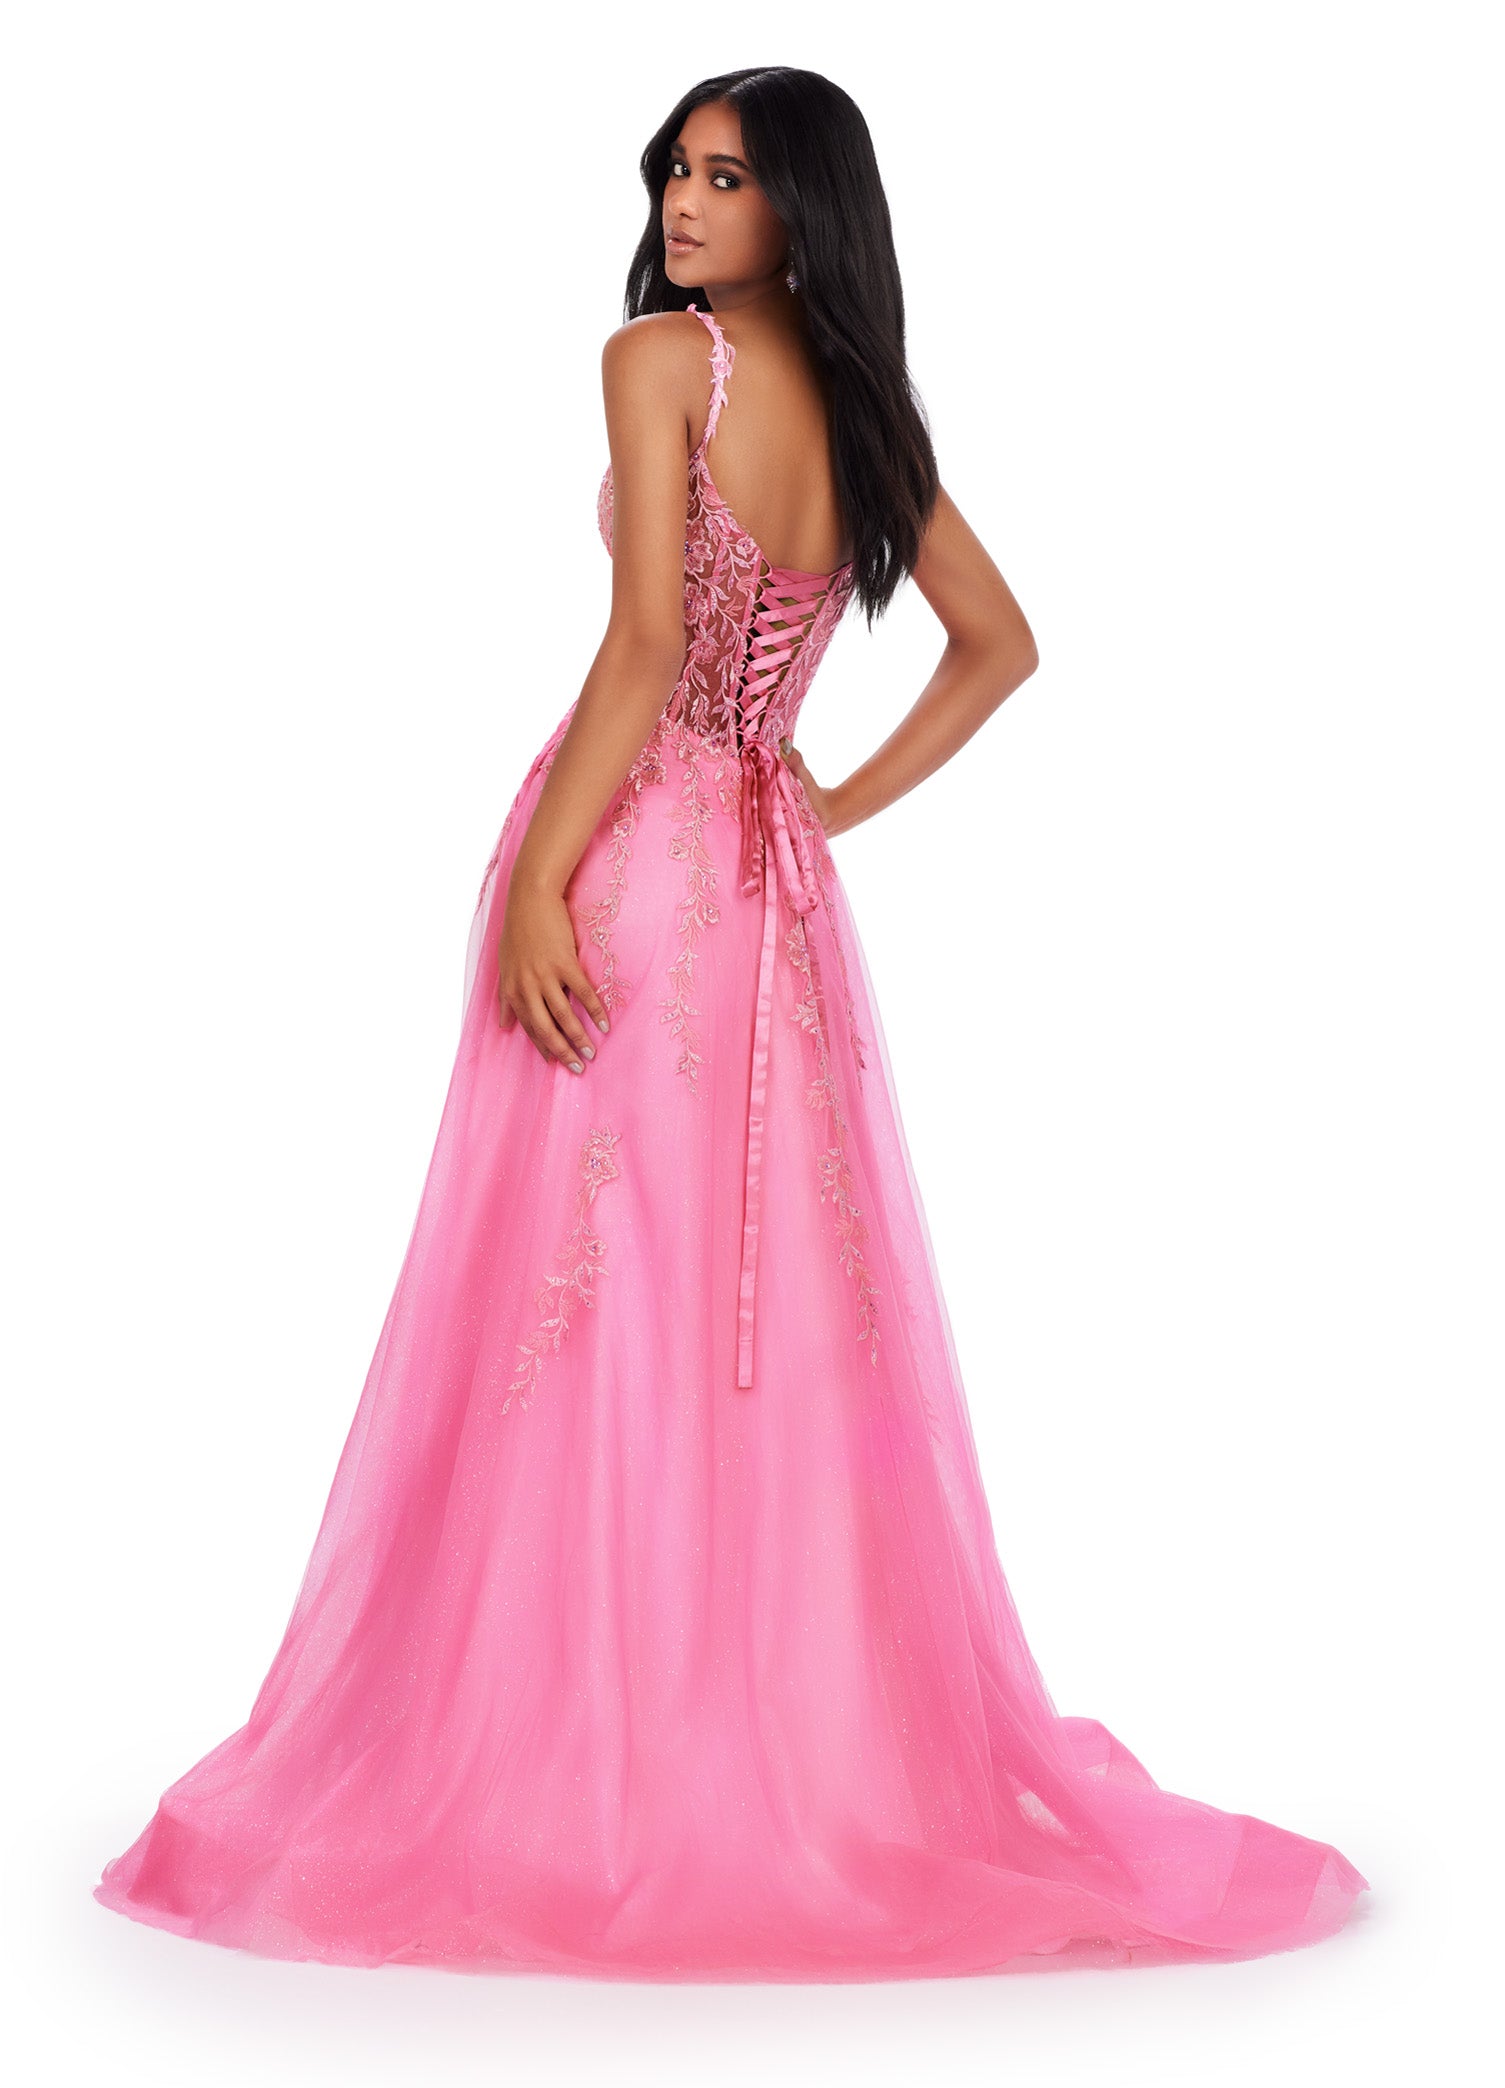 Step into the spotlight in the Ashley Lauren 11526 Long Prom Dress. Featuring spaghetti straps, a V-neckline, and a glitter tulle skirt, this gown is perfect for any formal event or pageant. With its elegant design and flattering silhouette, you'll feel like a star all night long. Living in a fairytale! This spaghetti strap gown features a v neckline with a lace applique bodice. The lace up back and glitter tulle skirt complete the look.